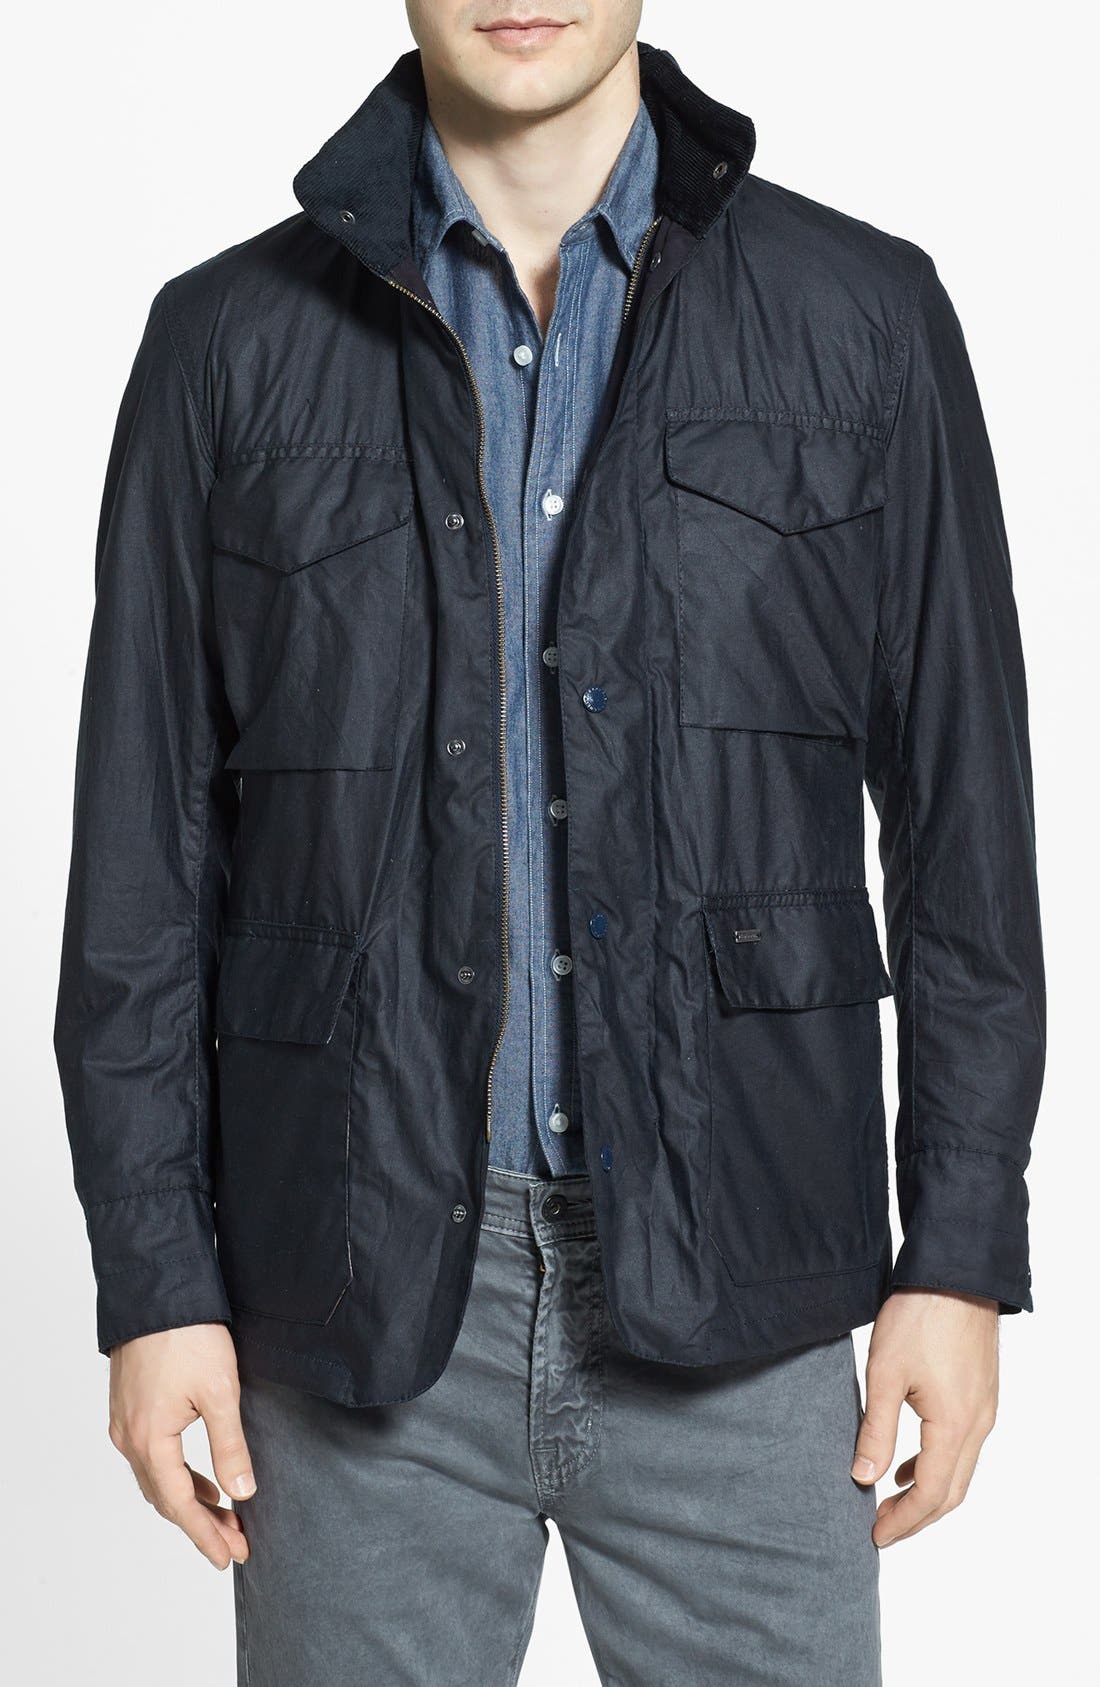 Barbour 'Sapper' Tailored Fit 